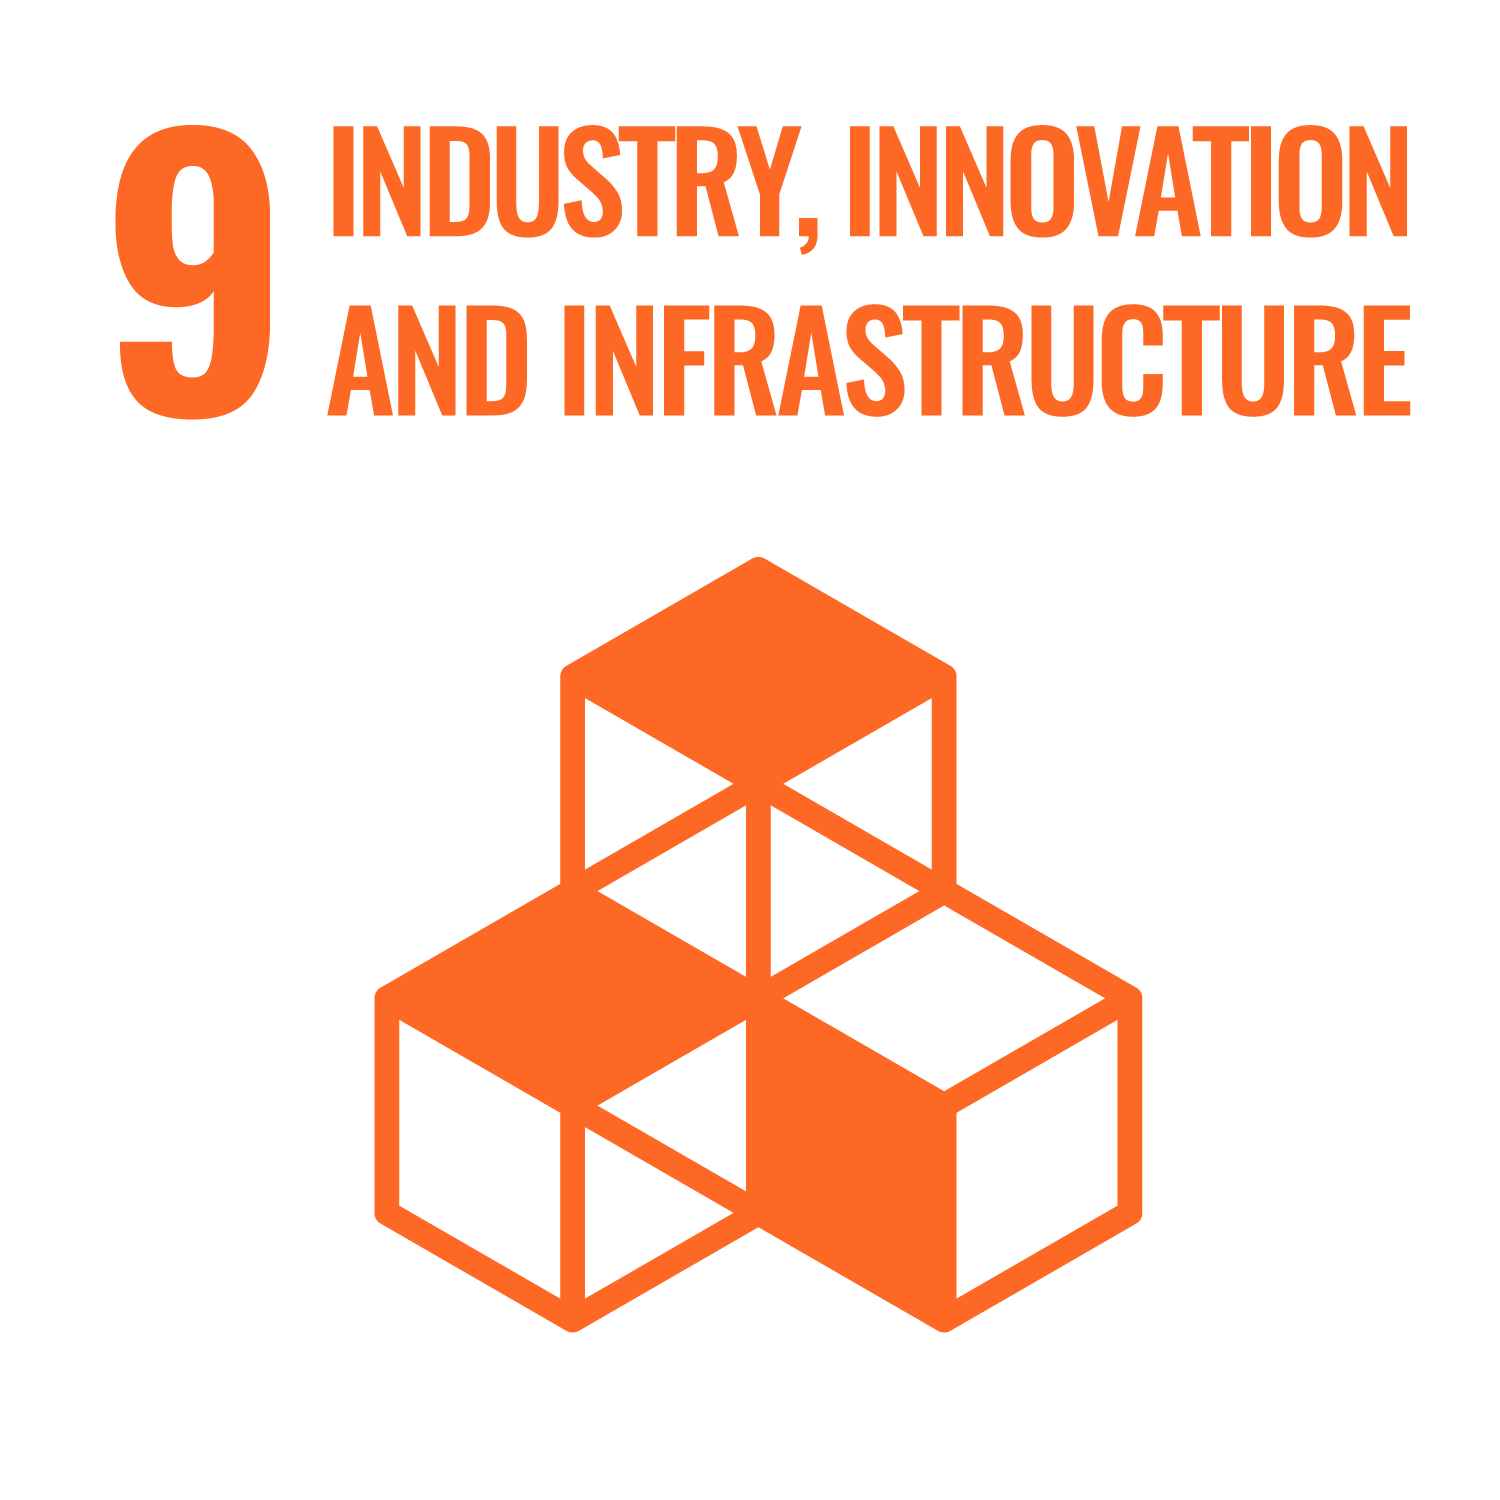 industry, innovation and infrstructure.